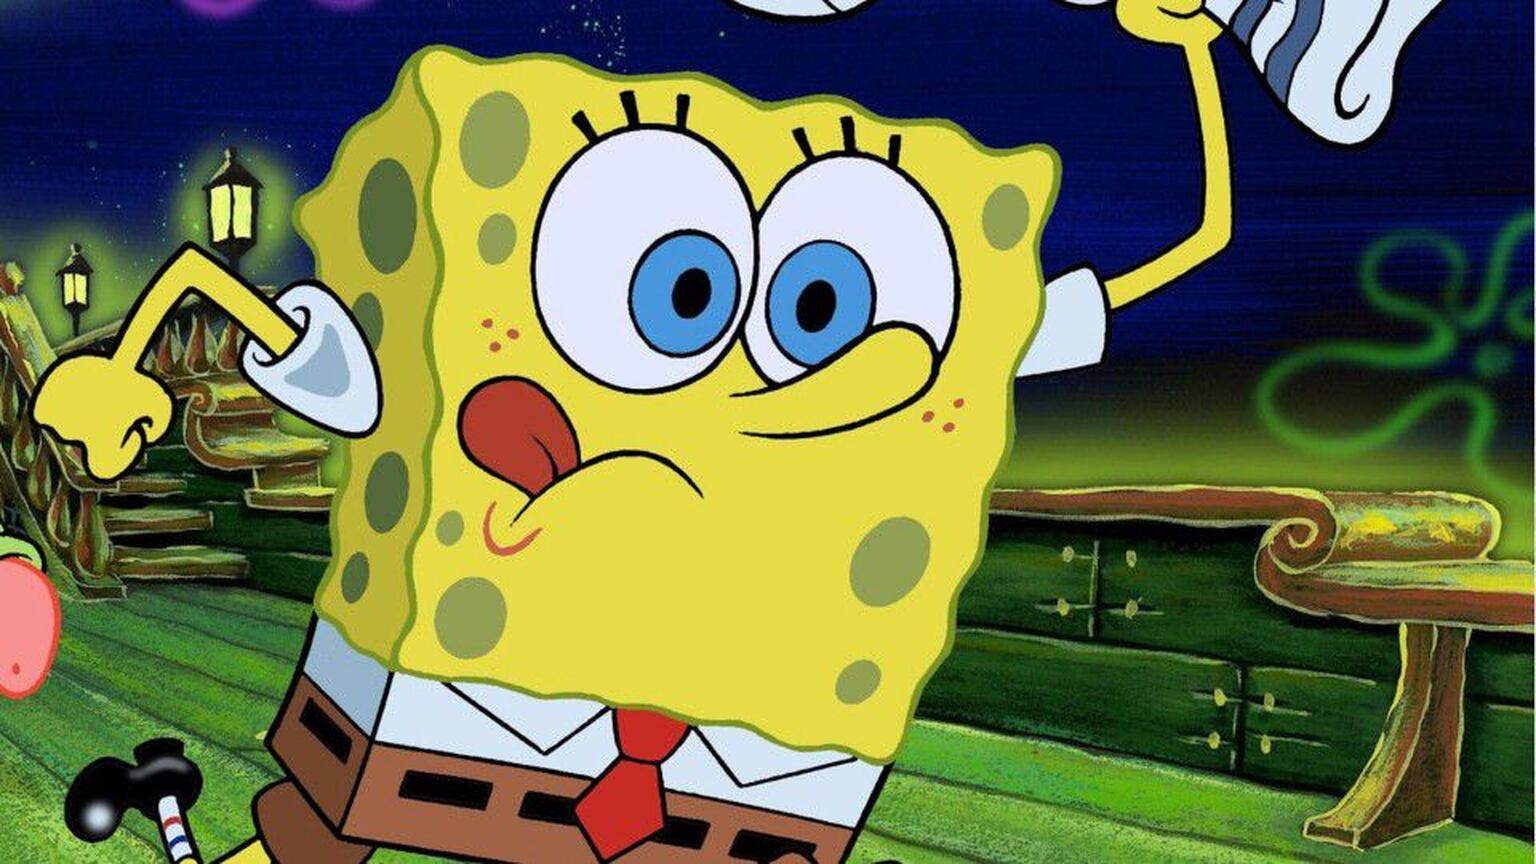 Inappropriate SpongeBob episodes get pulled by streaming services